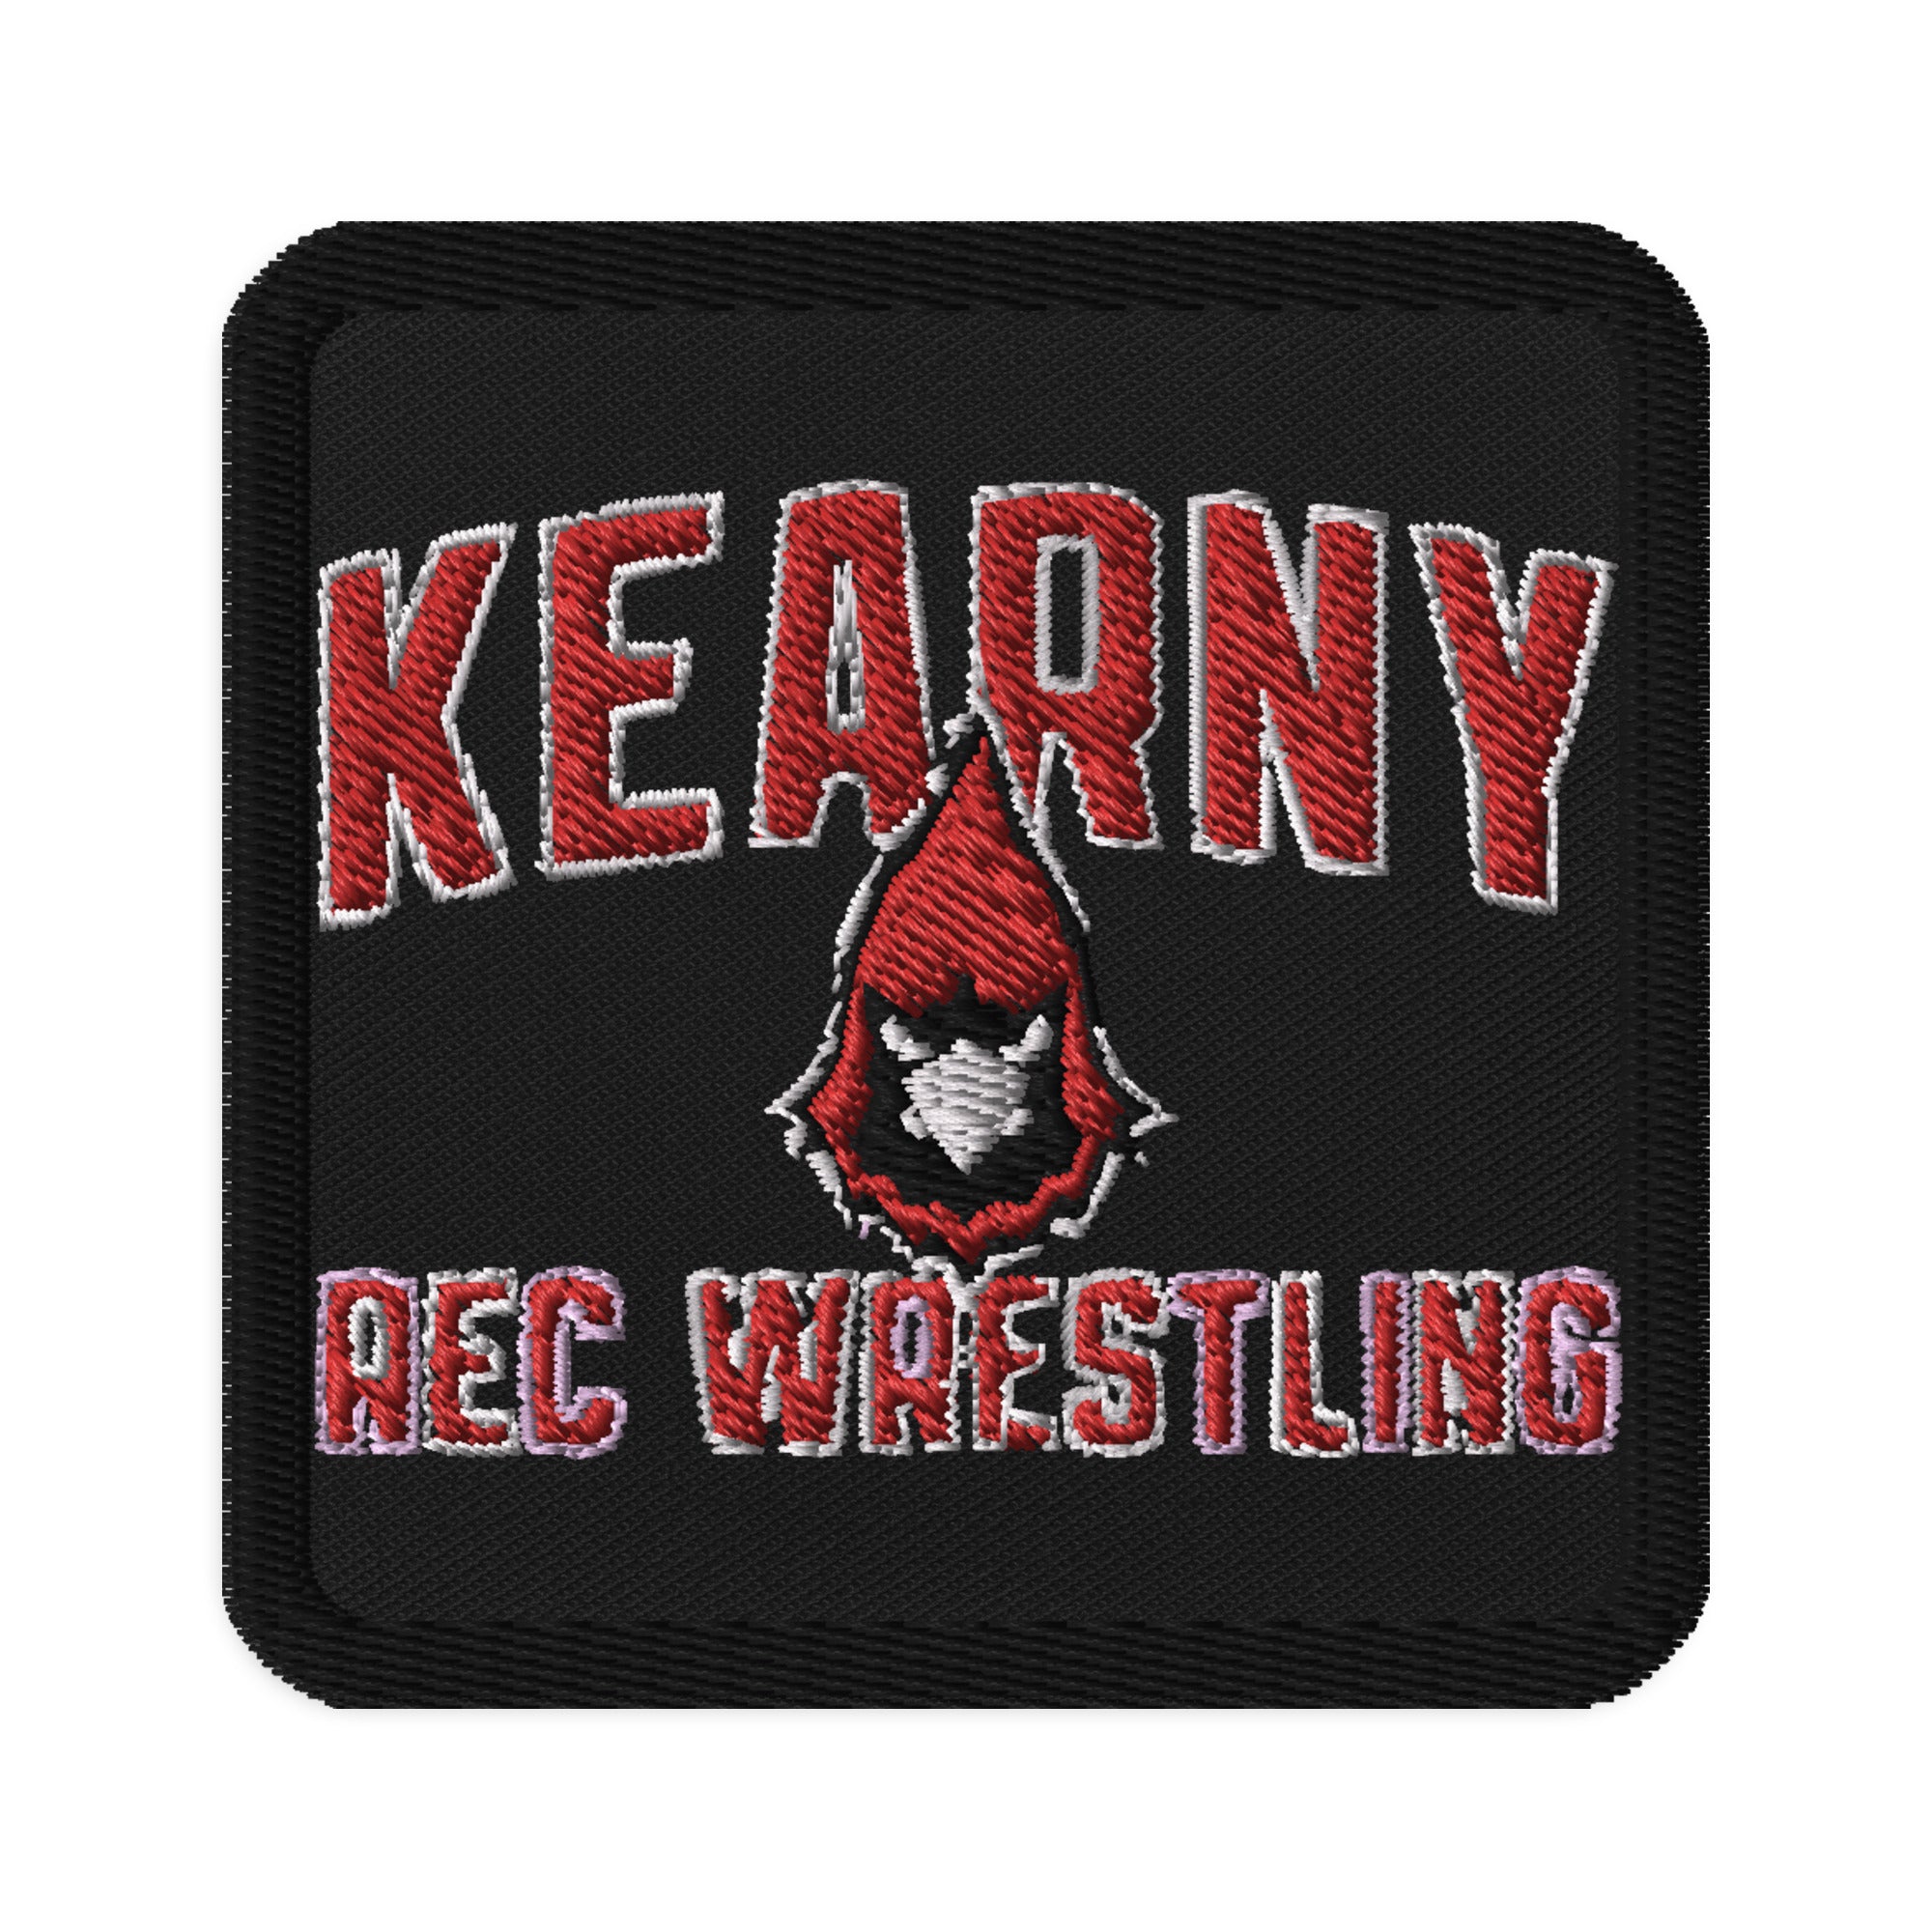 Kearny Rec Wrestling  Embroidered Patches